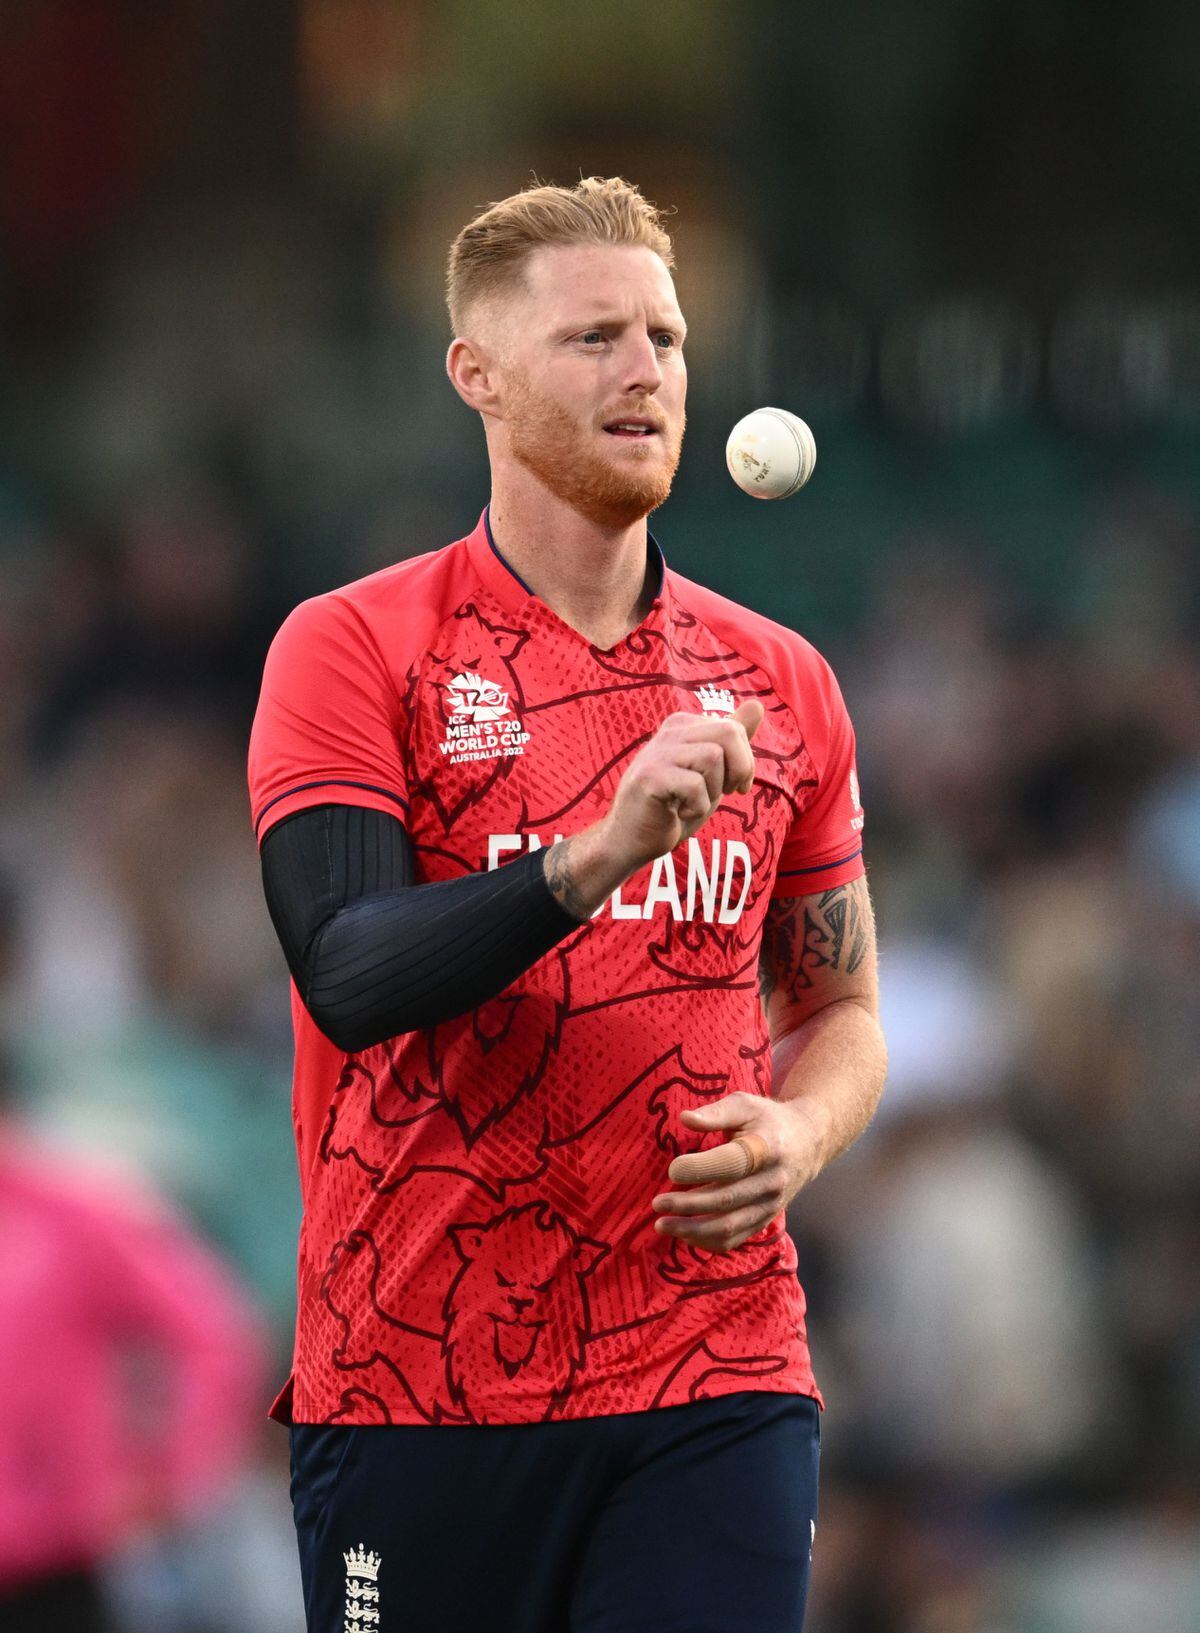 
              
England's Ben Stokes prior to the T20 World Cup match at the Sydney Cricket Ground, Sydney. Picture date: Saturday November 5, 2022. PA Photo. See PA story CRICKET England. Photo credit should read: Dan Himbrechts/PA Wire.


RESTRICTIONS: Use subject to restrictions. Editorial use only, no 
commercial use without prior consent from rights holder.
            
